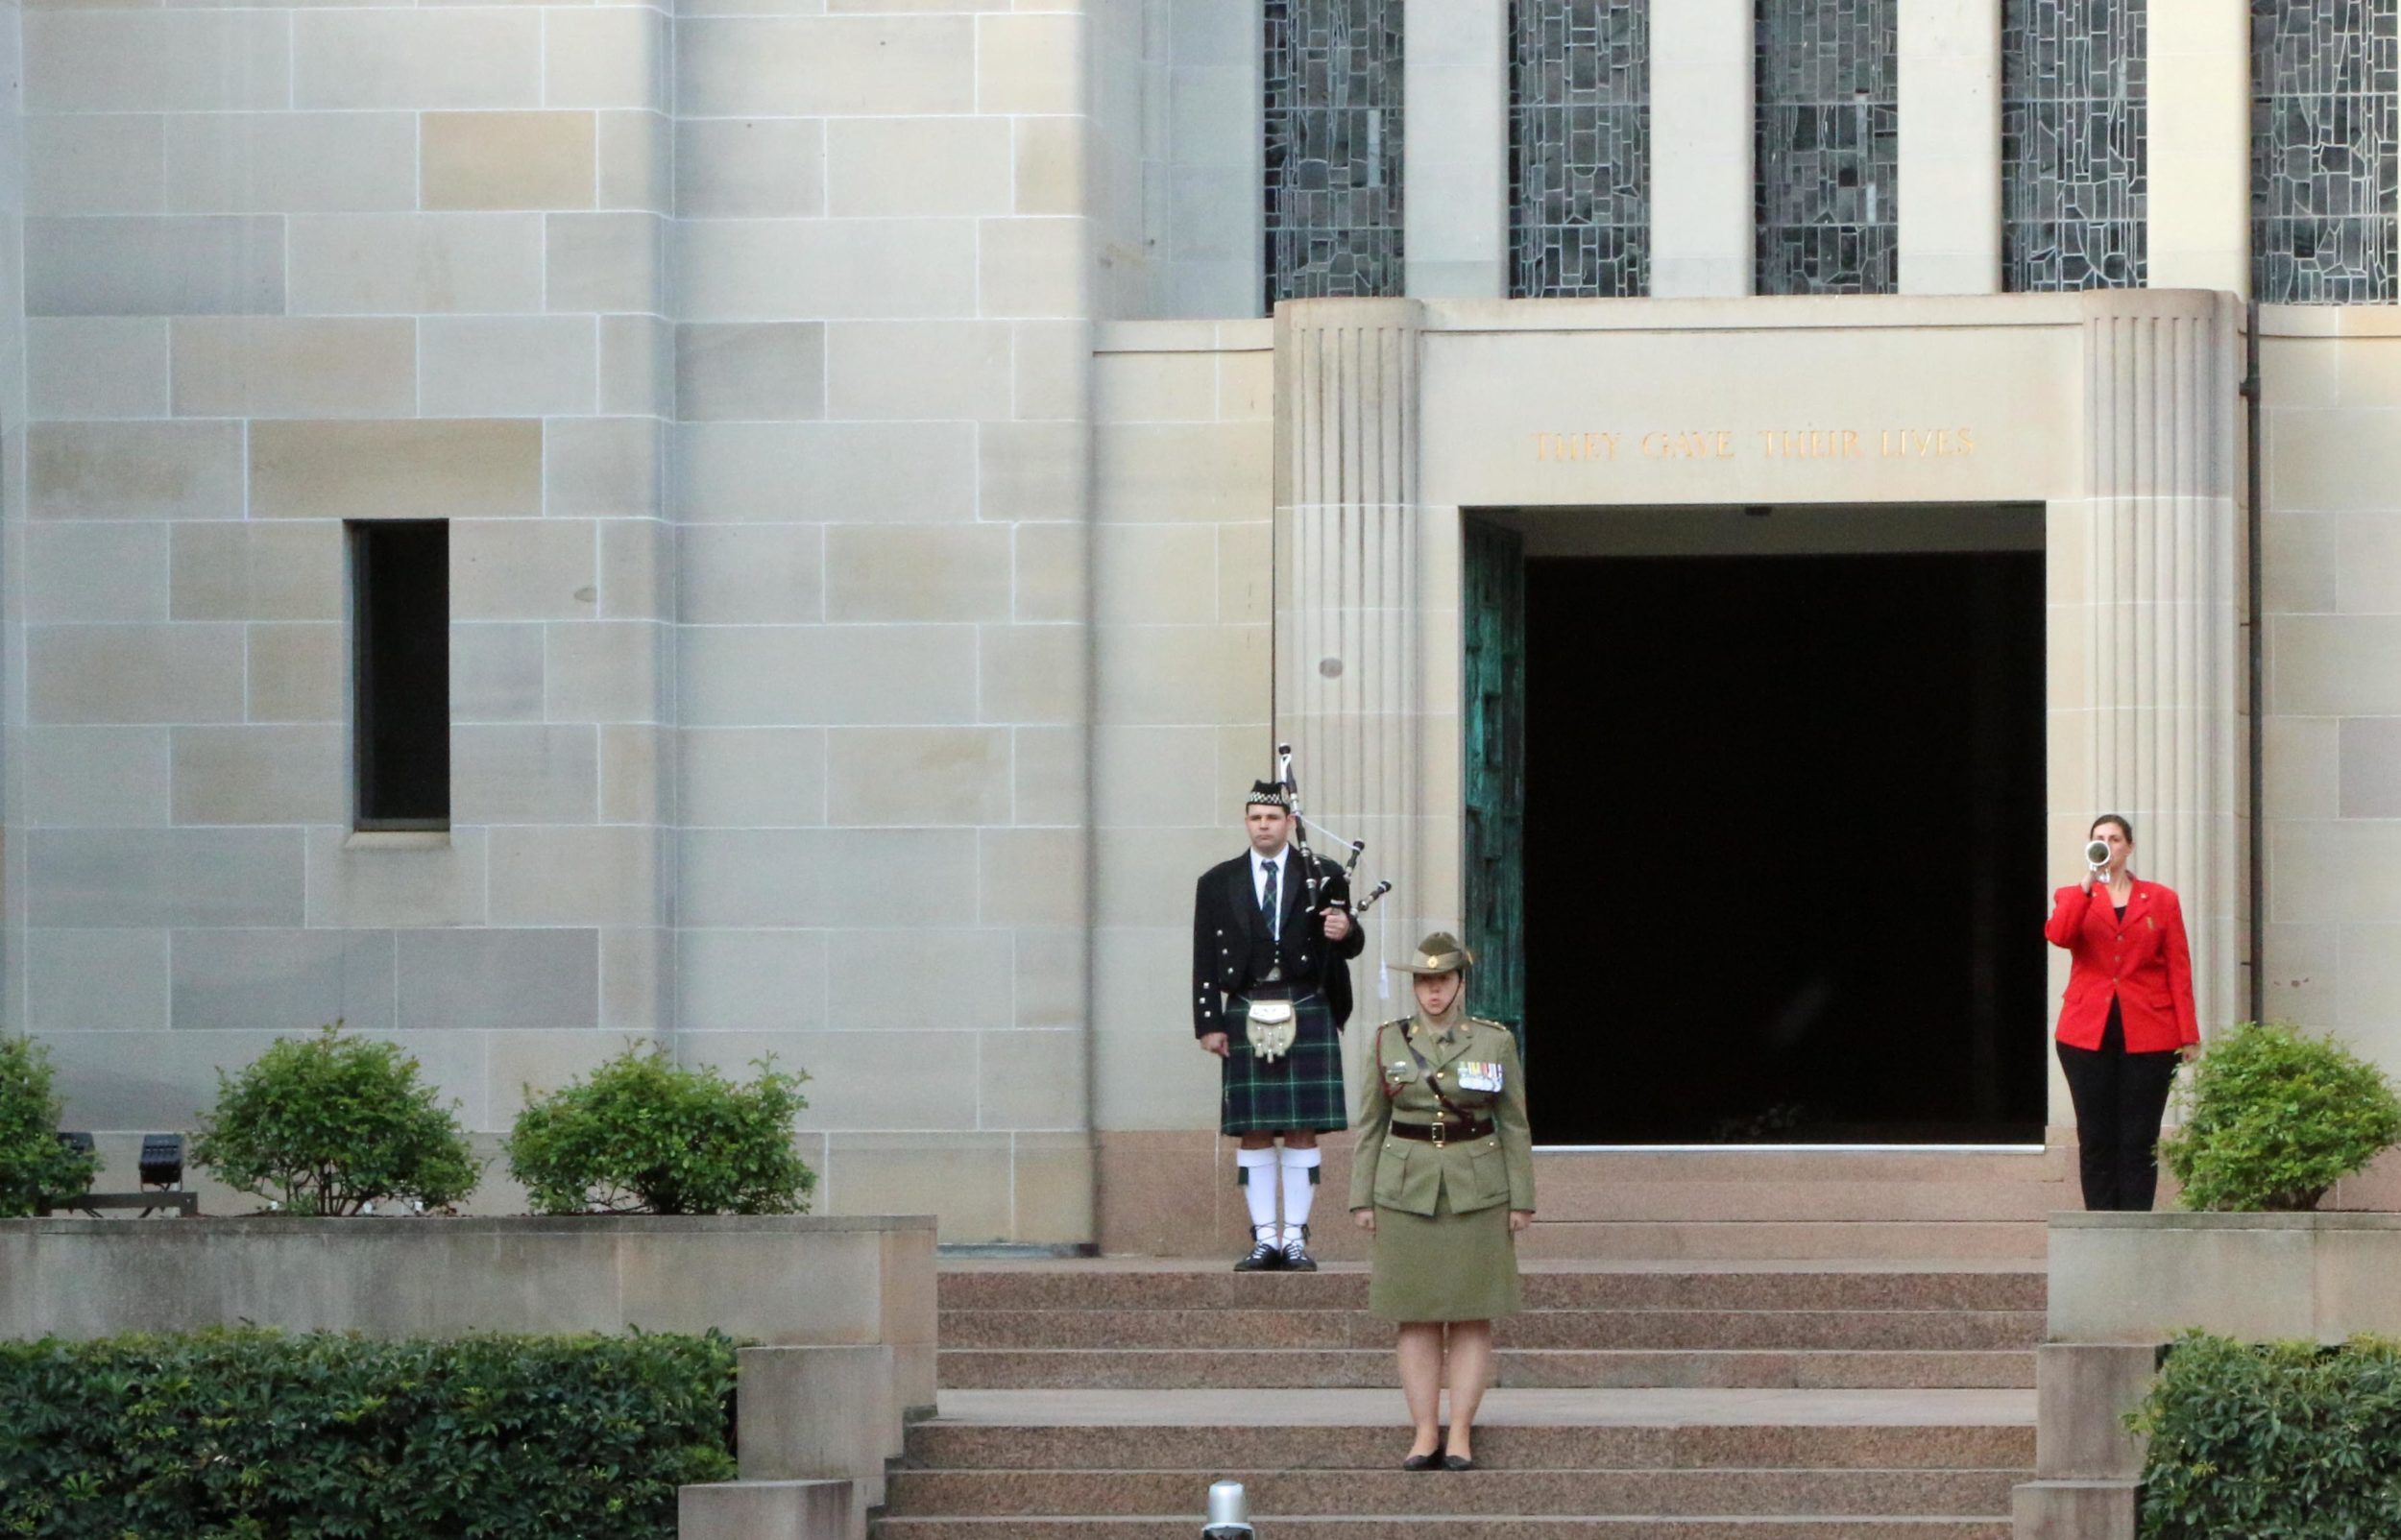 The Last Post Ceremony at the Australian War Memorial in Canberra